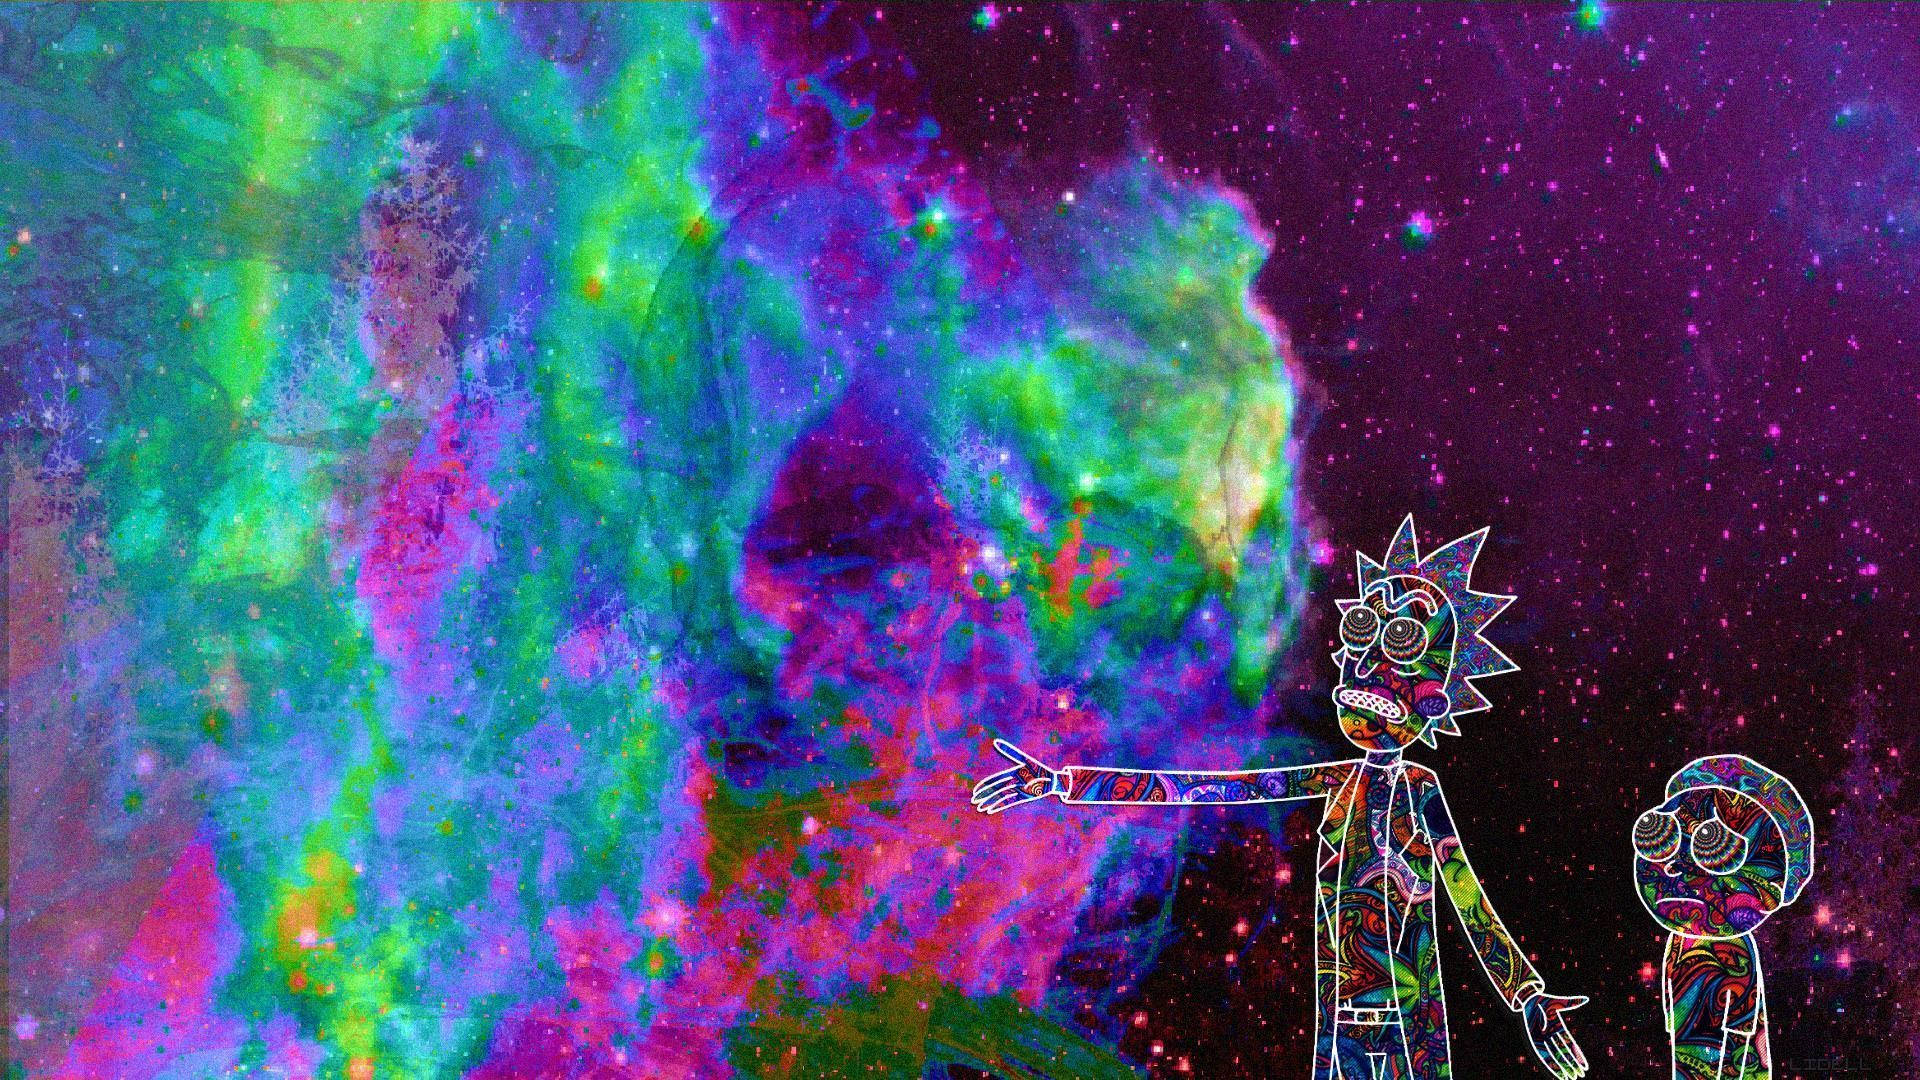 Download Rick And Morty Trippy Multicolored Galaxy Wallpaper | Wallpapers .com